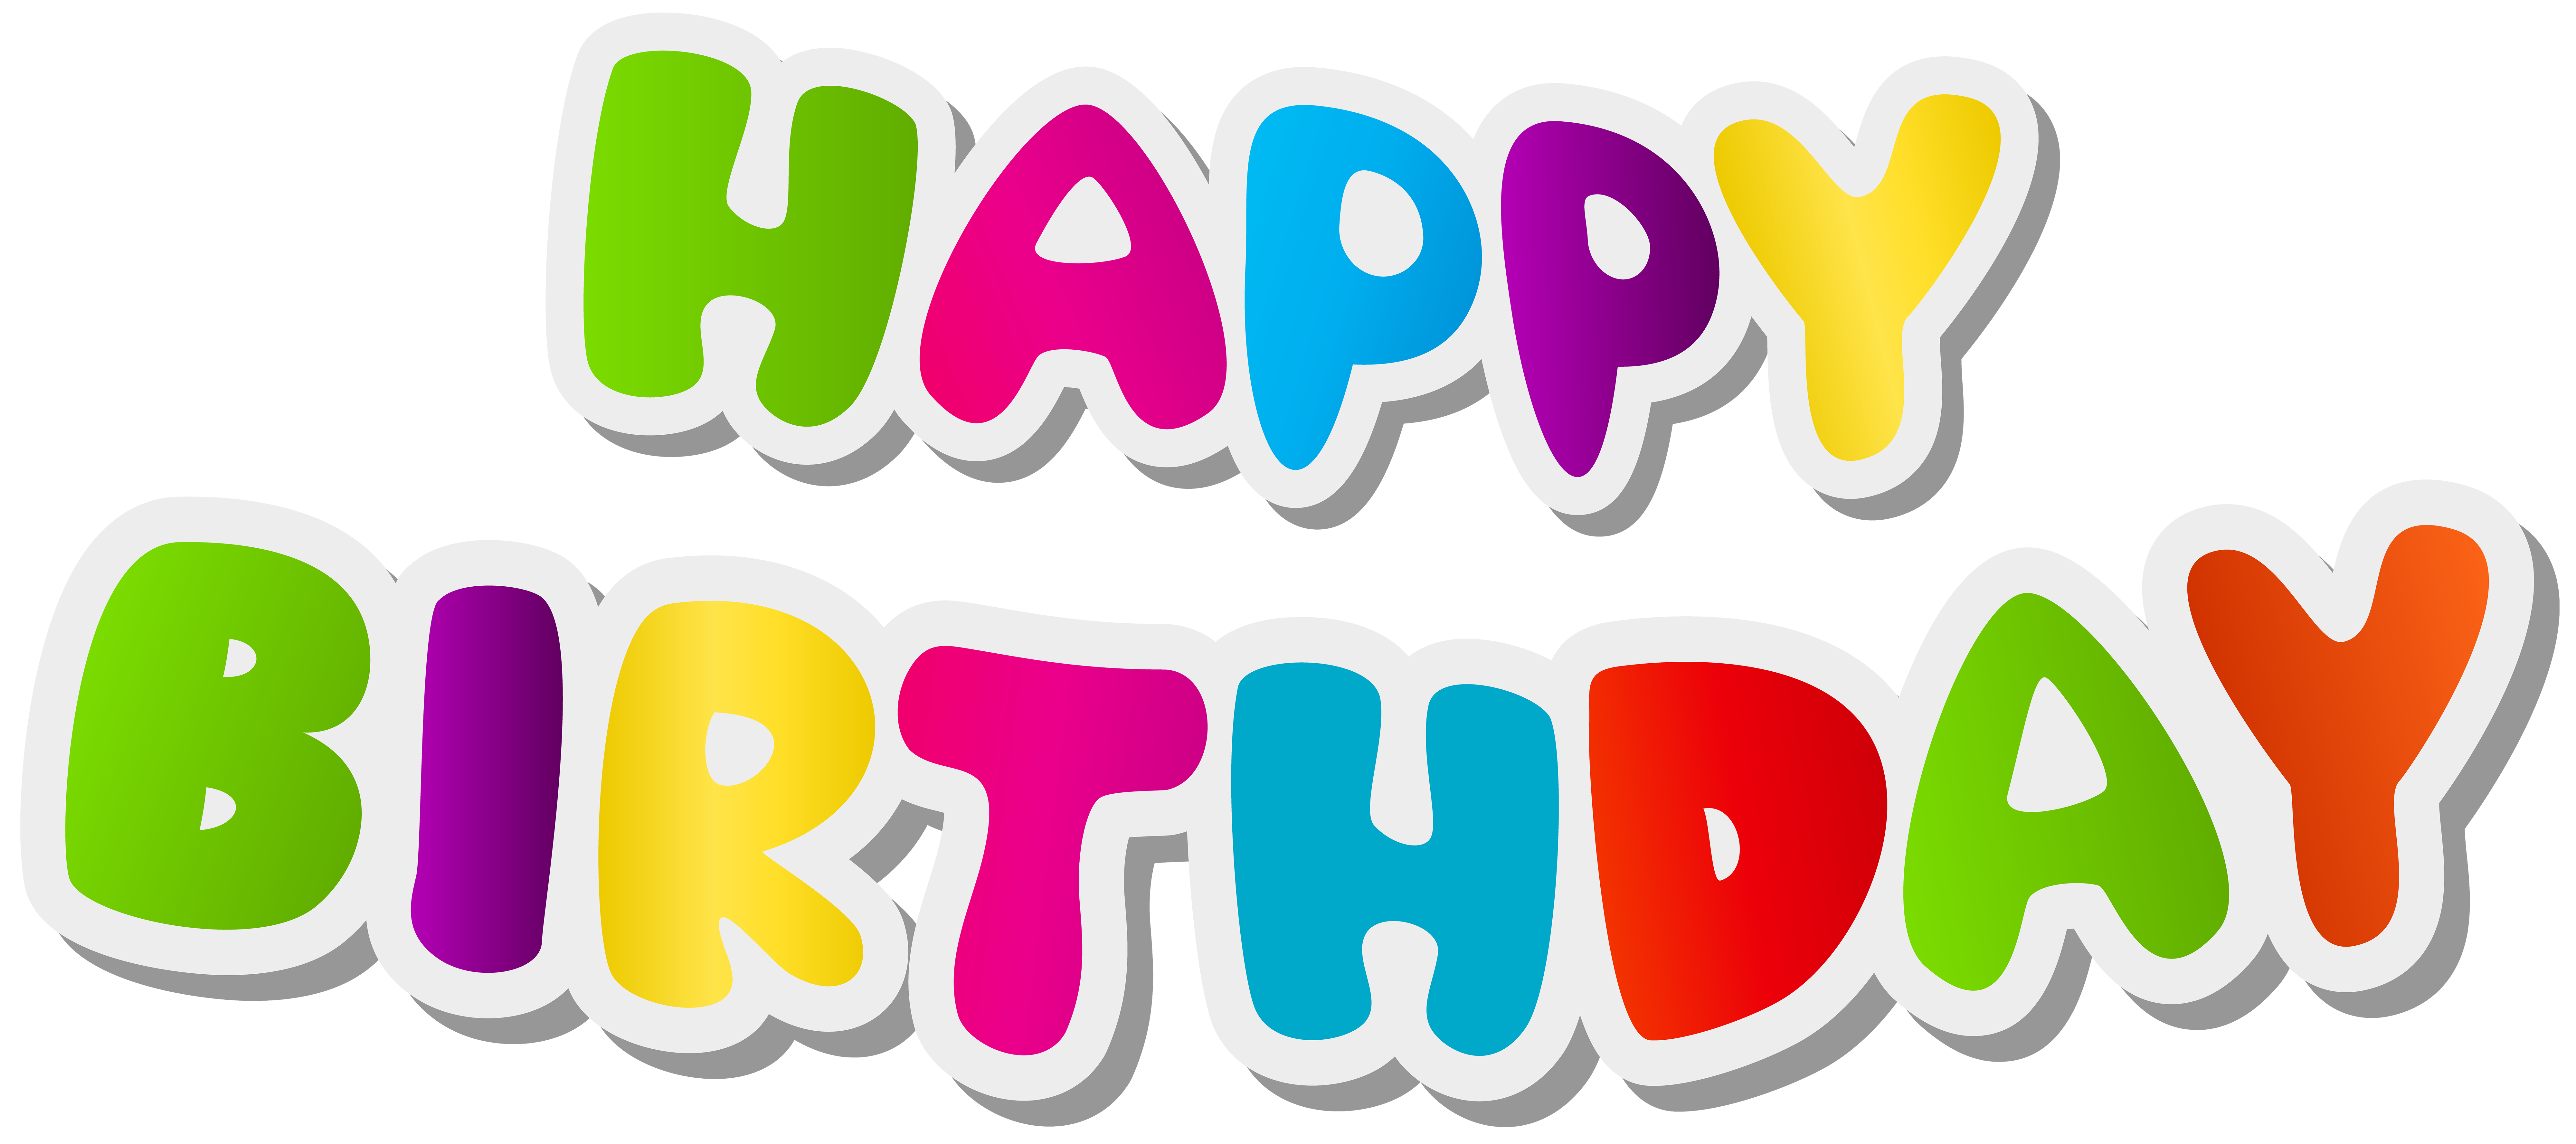 Happy Birthday Text Png Clip Art Image Gallery Yopriceville High Quality Images And Transparent Png Free Clipart